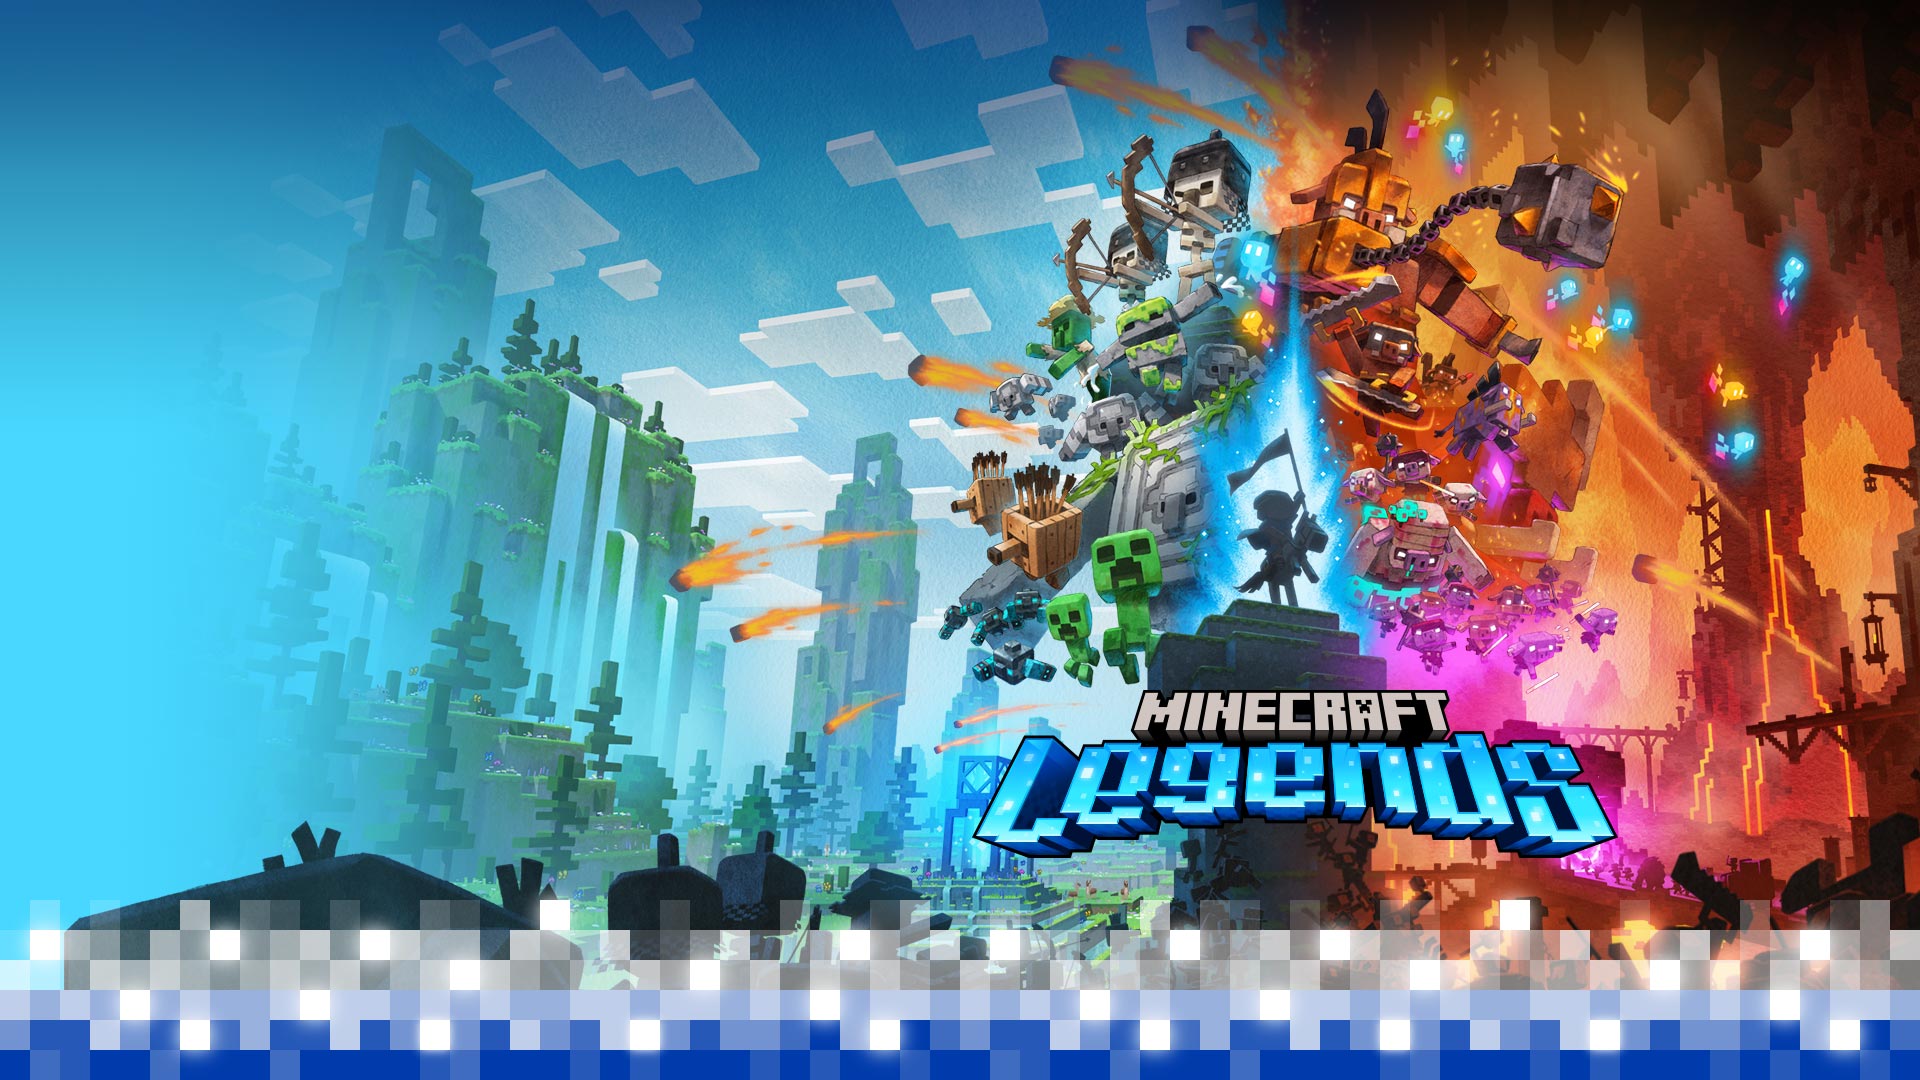 Minecraft Legends, the Overworld and the Nether clash with mobs from both worlds preparing to fight as the silhouette of a hero stands in the middle.